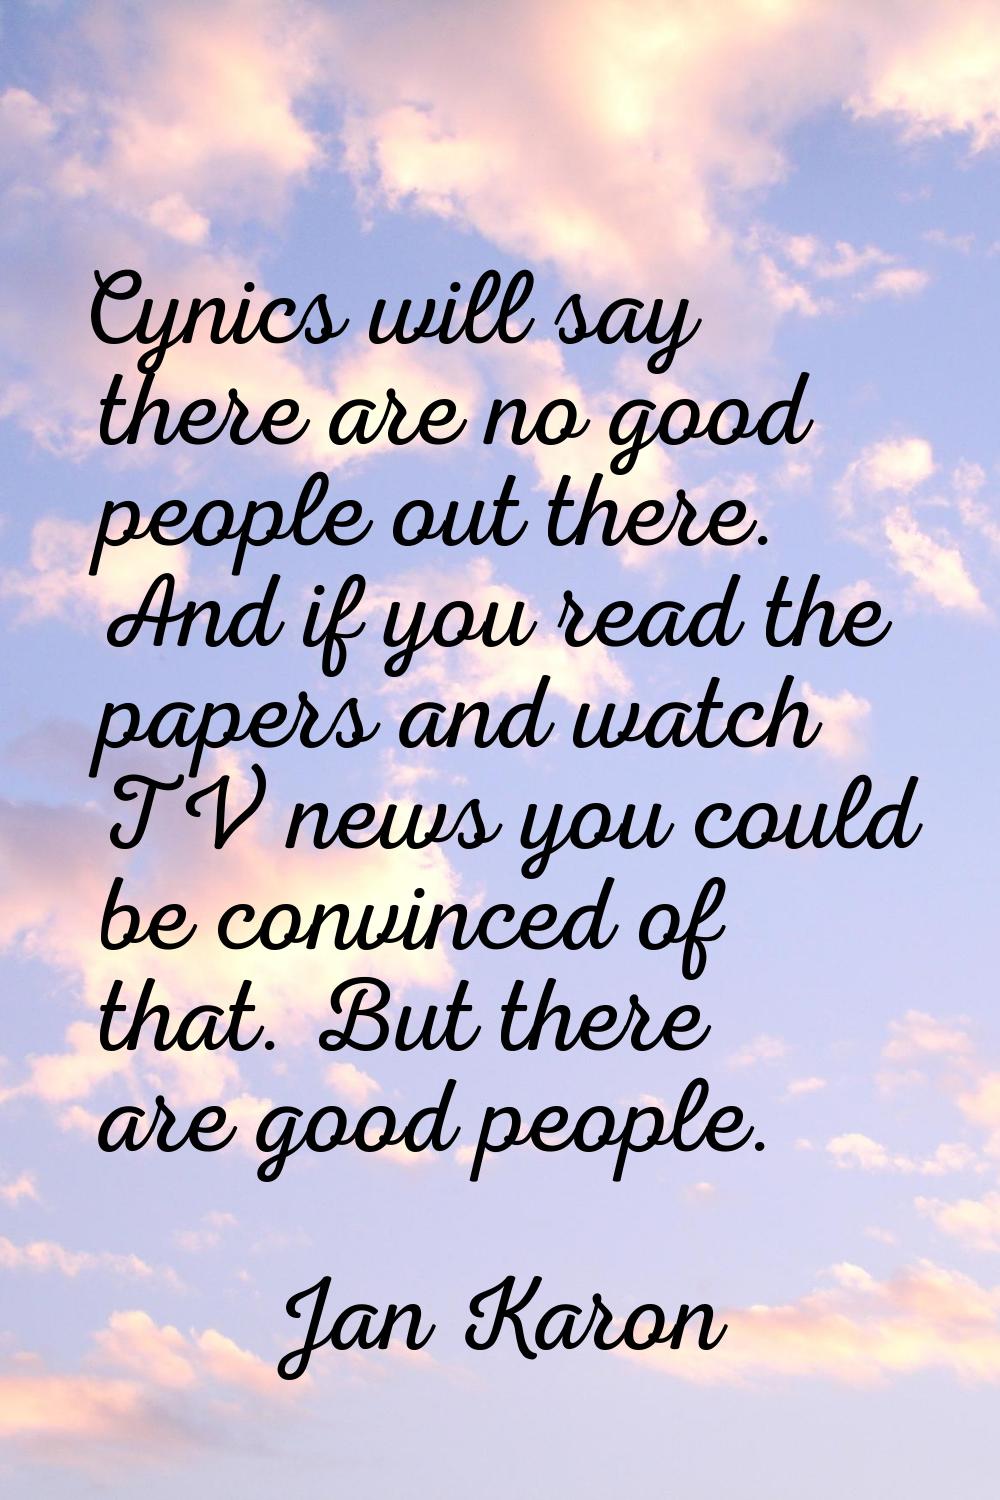 Cynics will say there are no good people out there. And if you read the papers and watch TV news yo